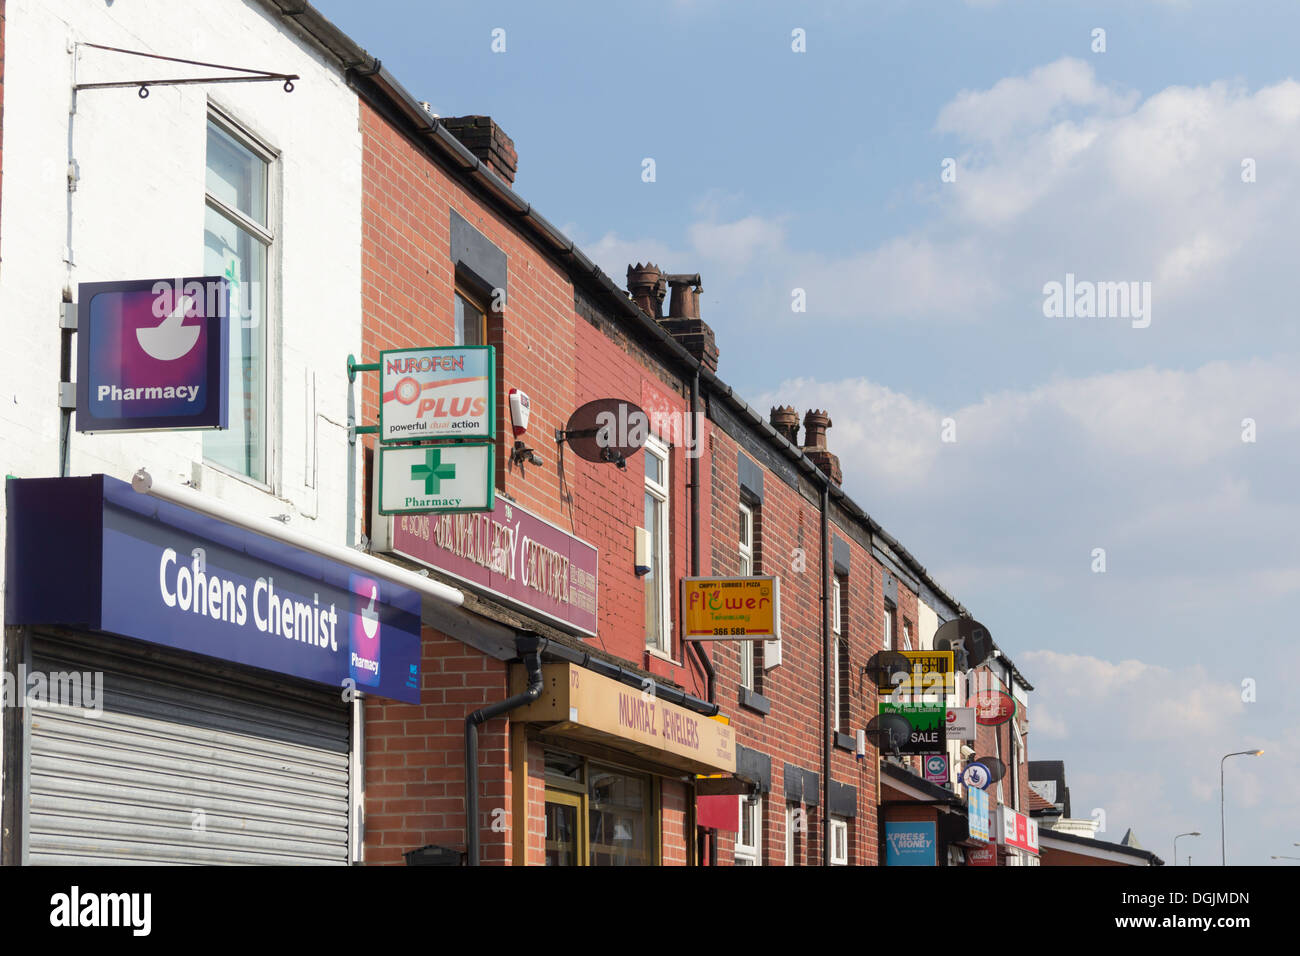 A parade of small shops on Crescent Road, Bolton, Lancashire, each with projecting signs and fascias advertising their business. Stock Photo